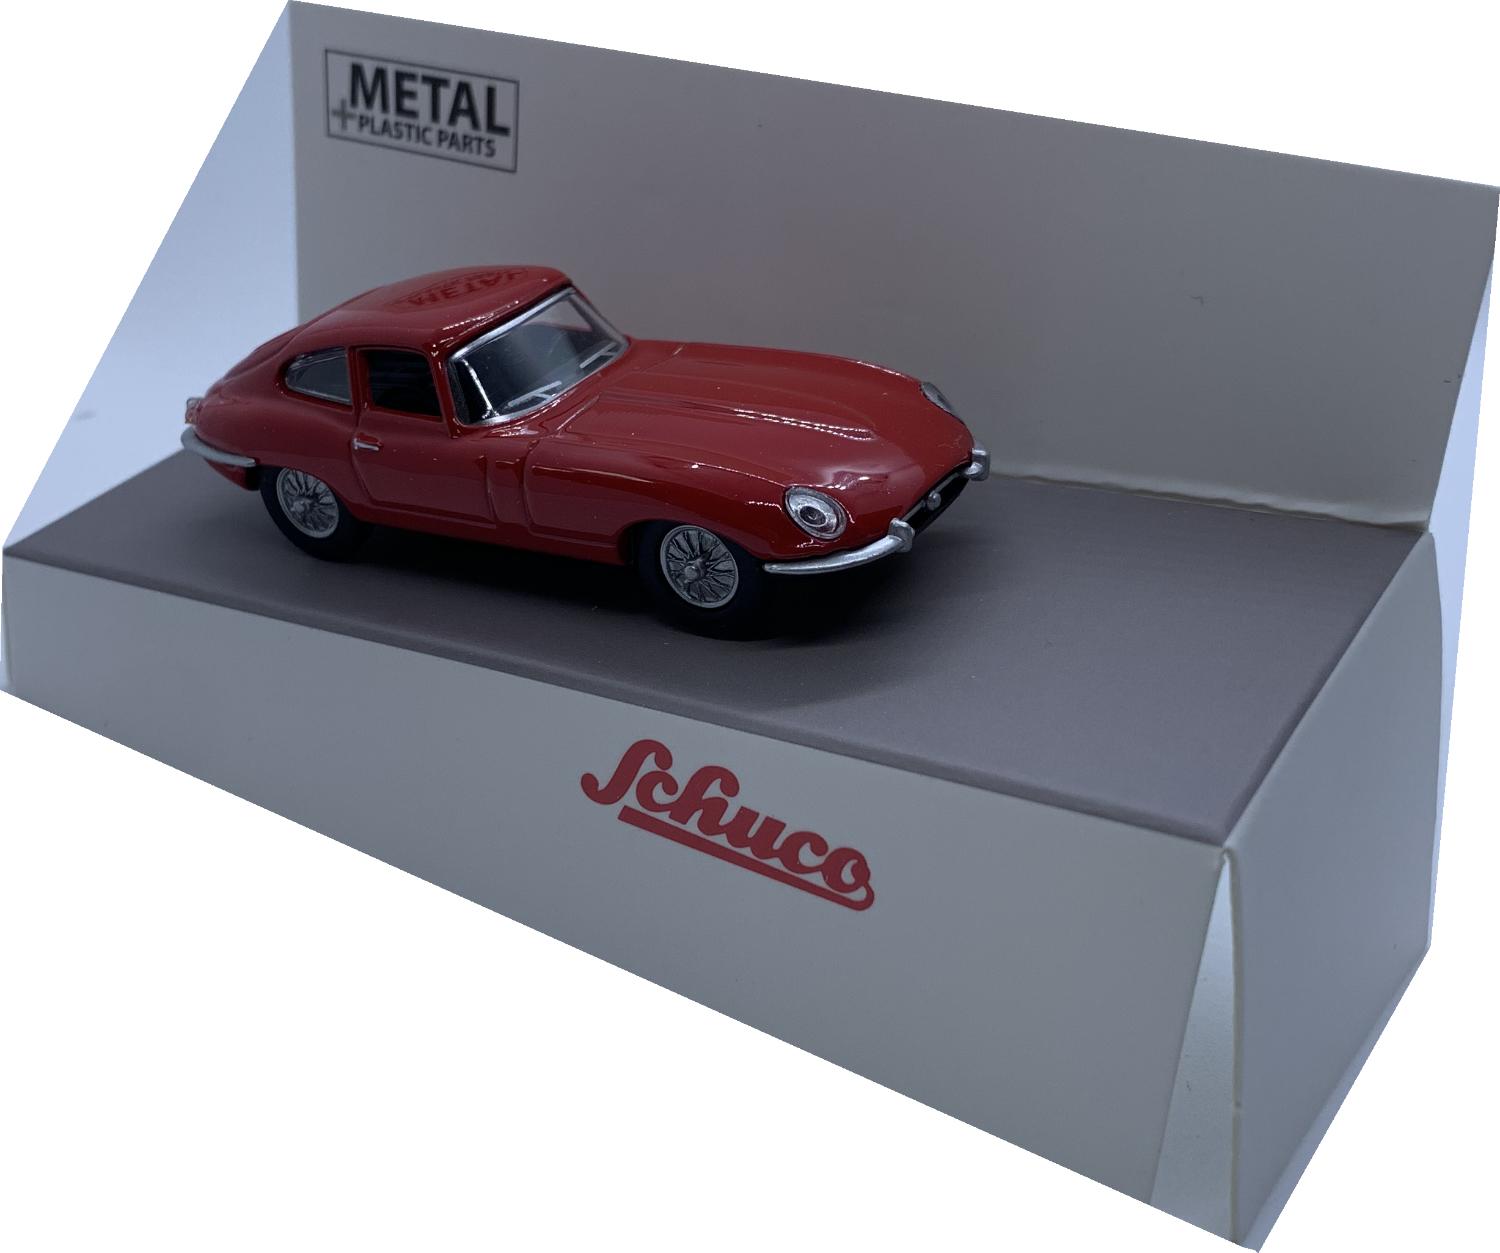 Jaguar E Type Coupe in red 1:64 scale model from Schuco